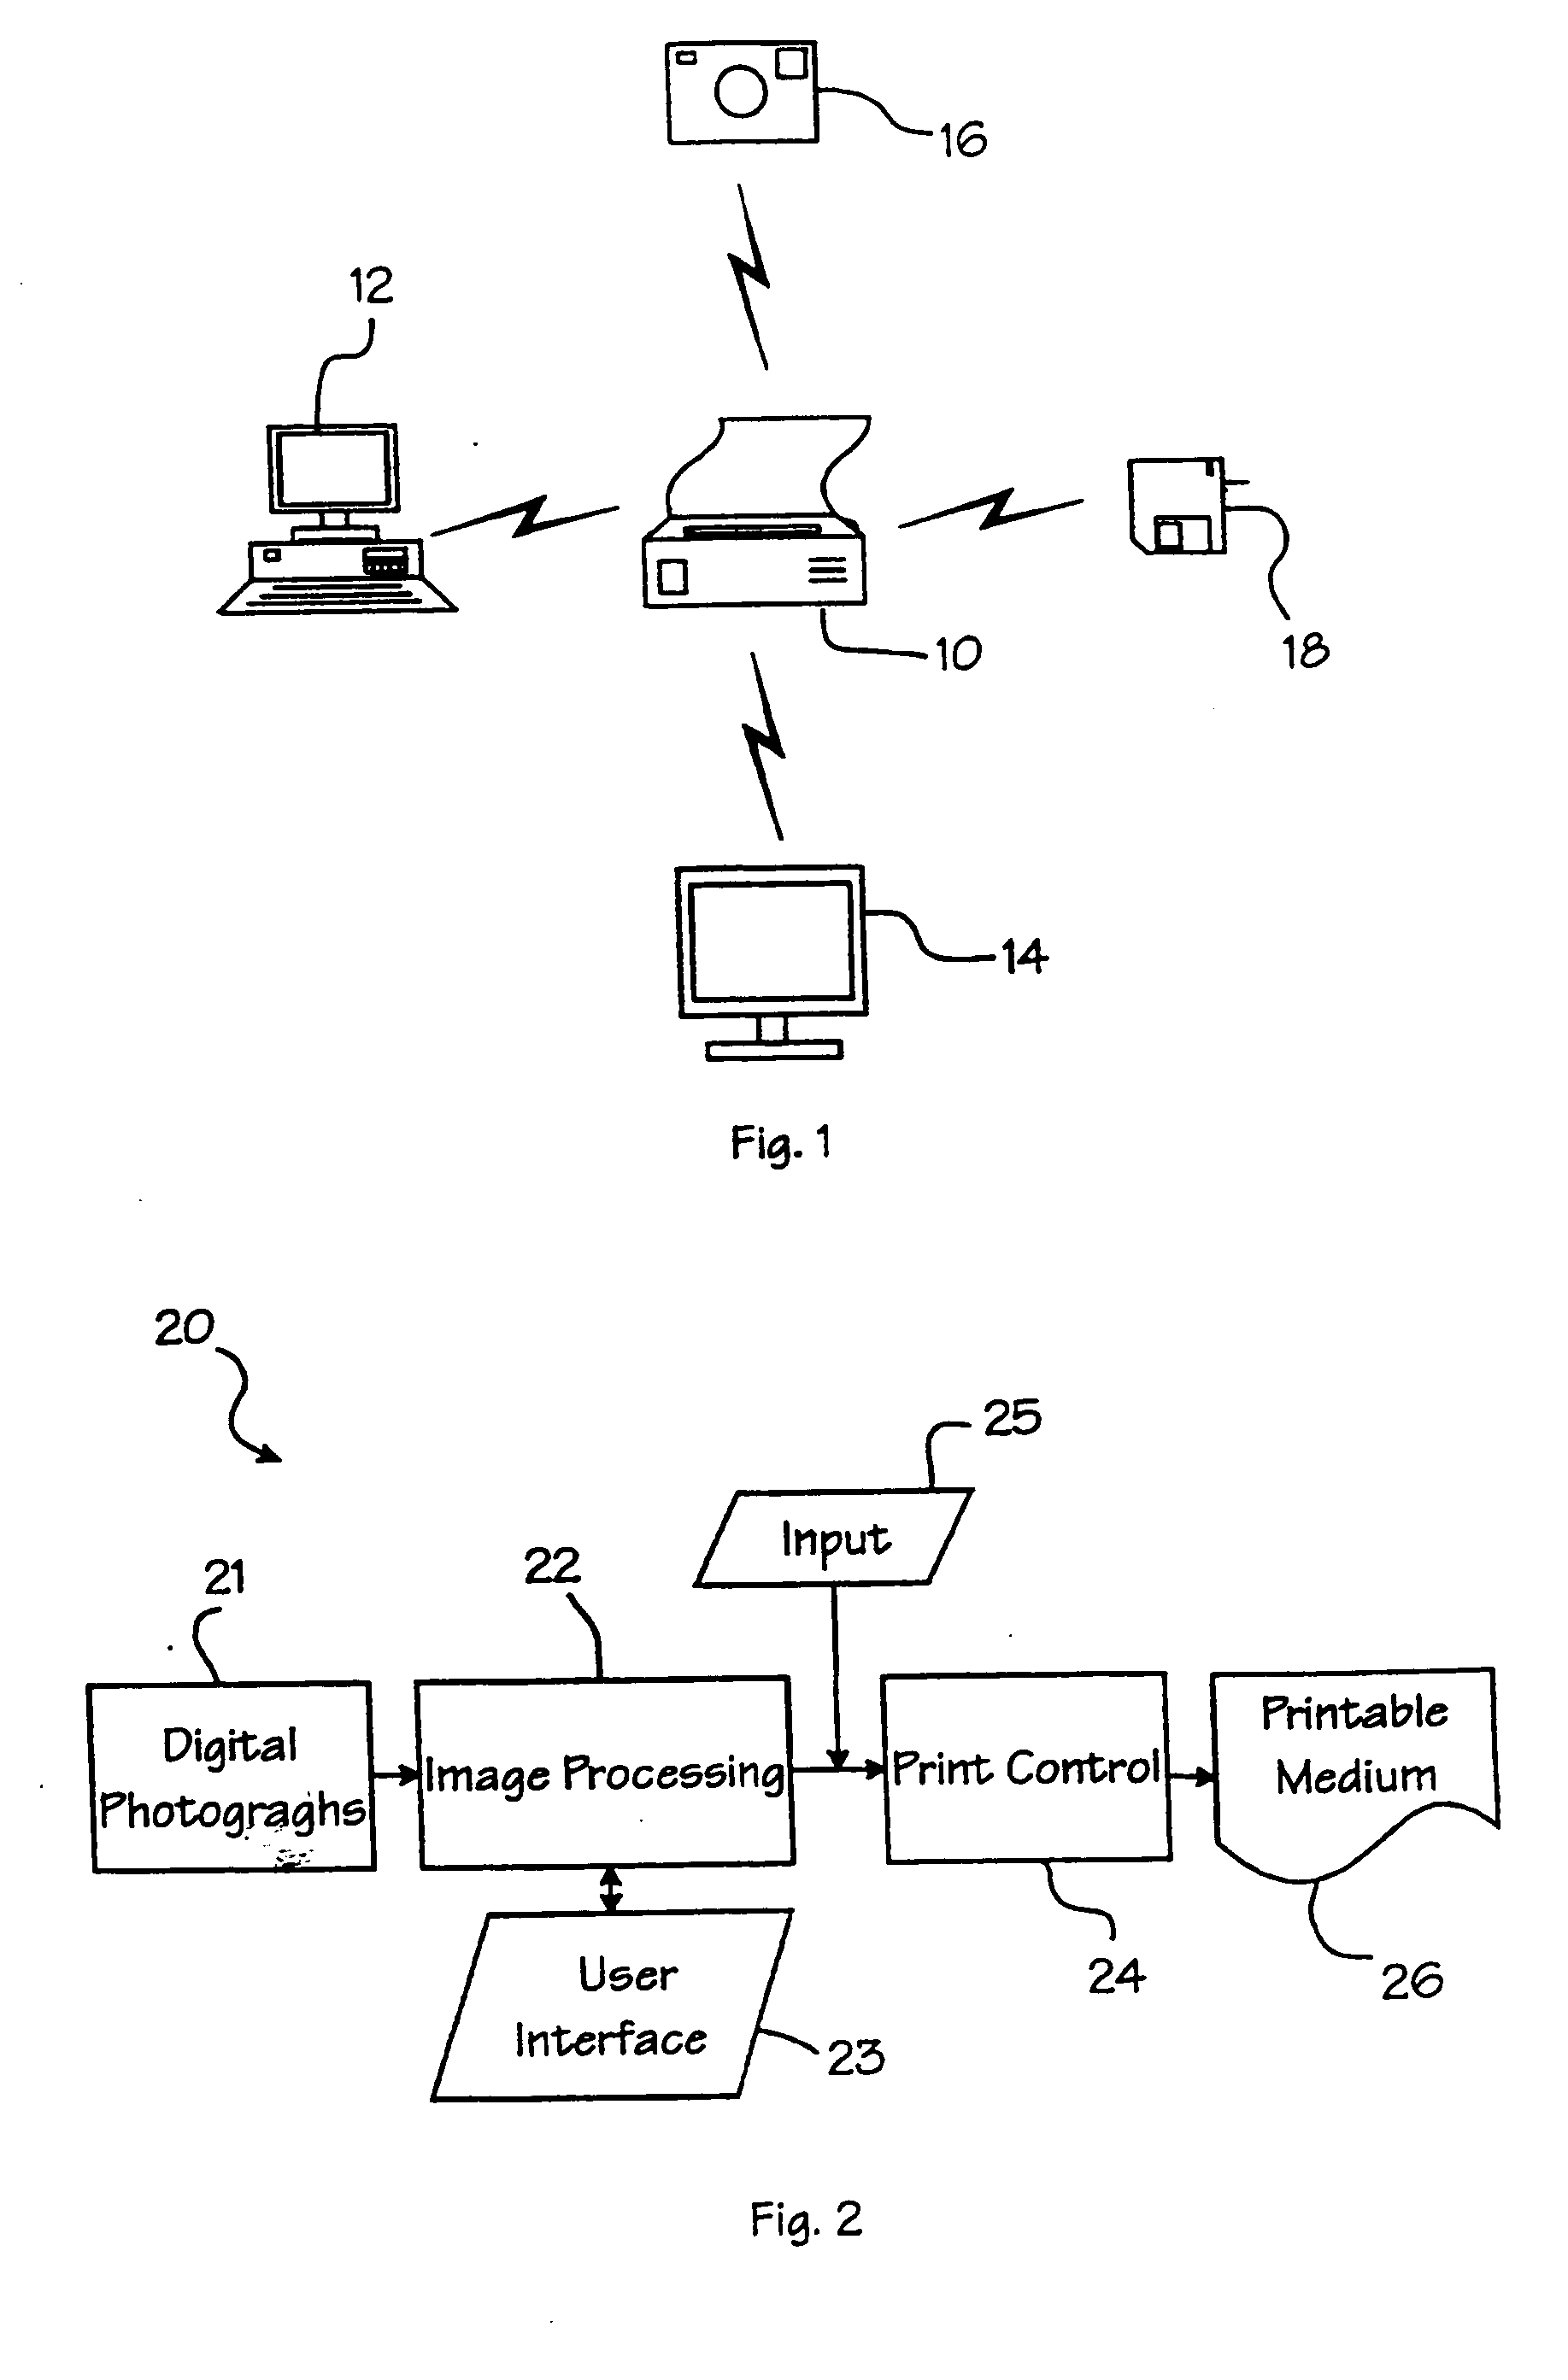 Photoprinter control of peripheral devices